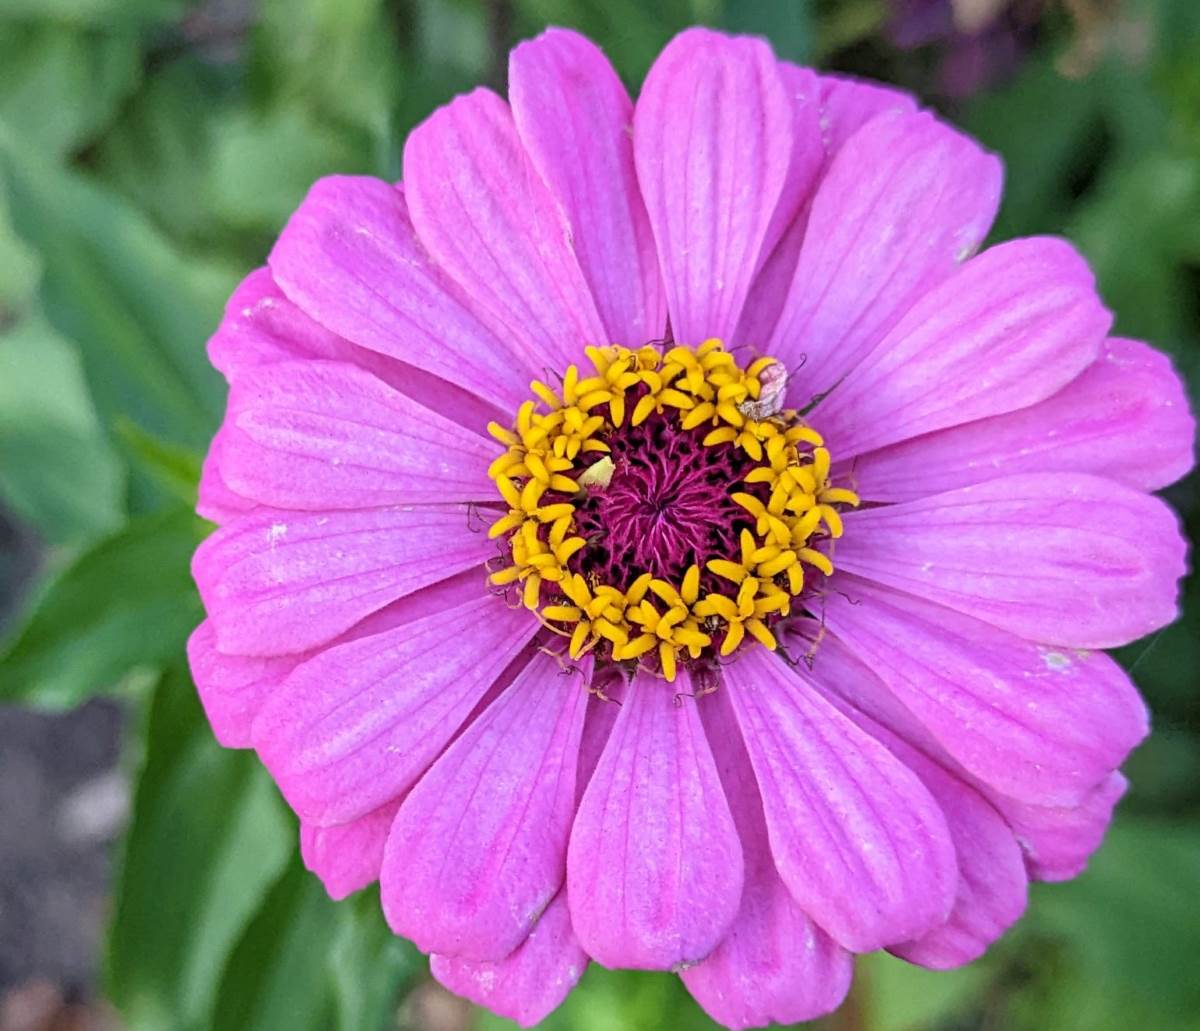 A circular pink flower, with yellow in the center